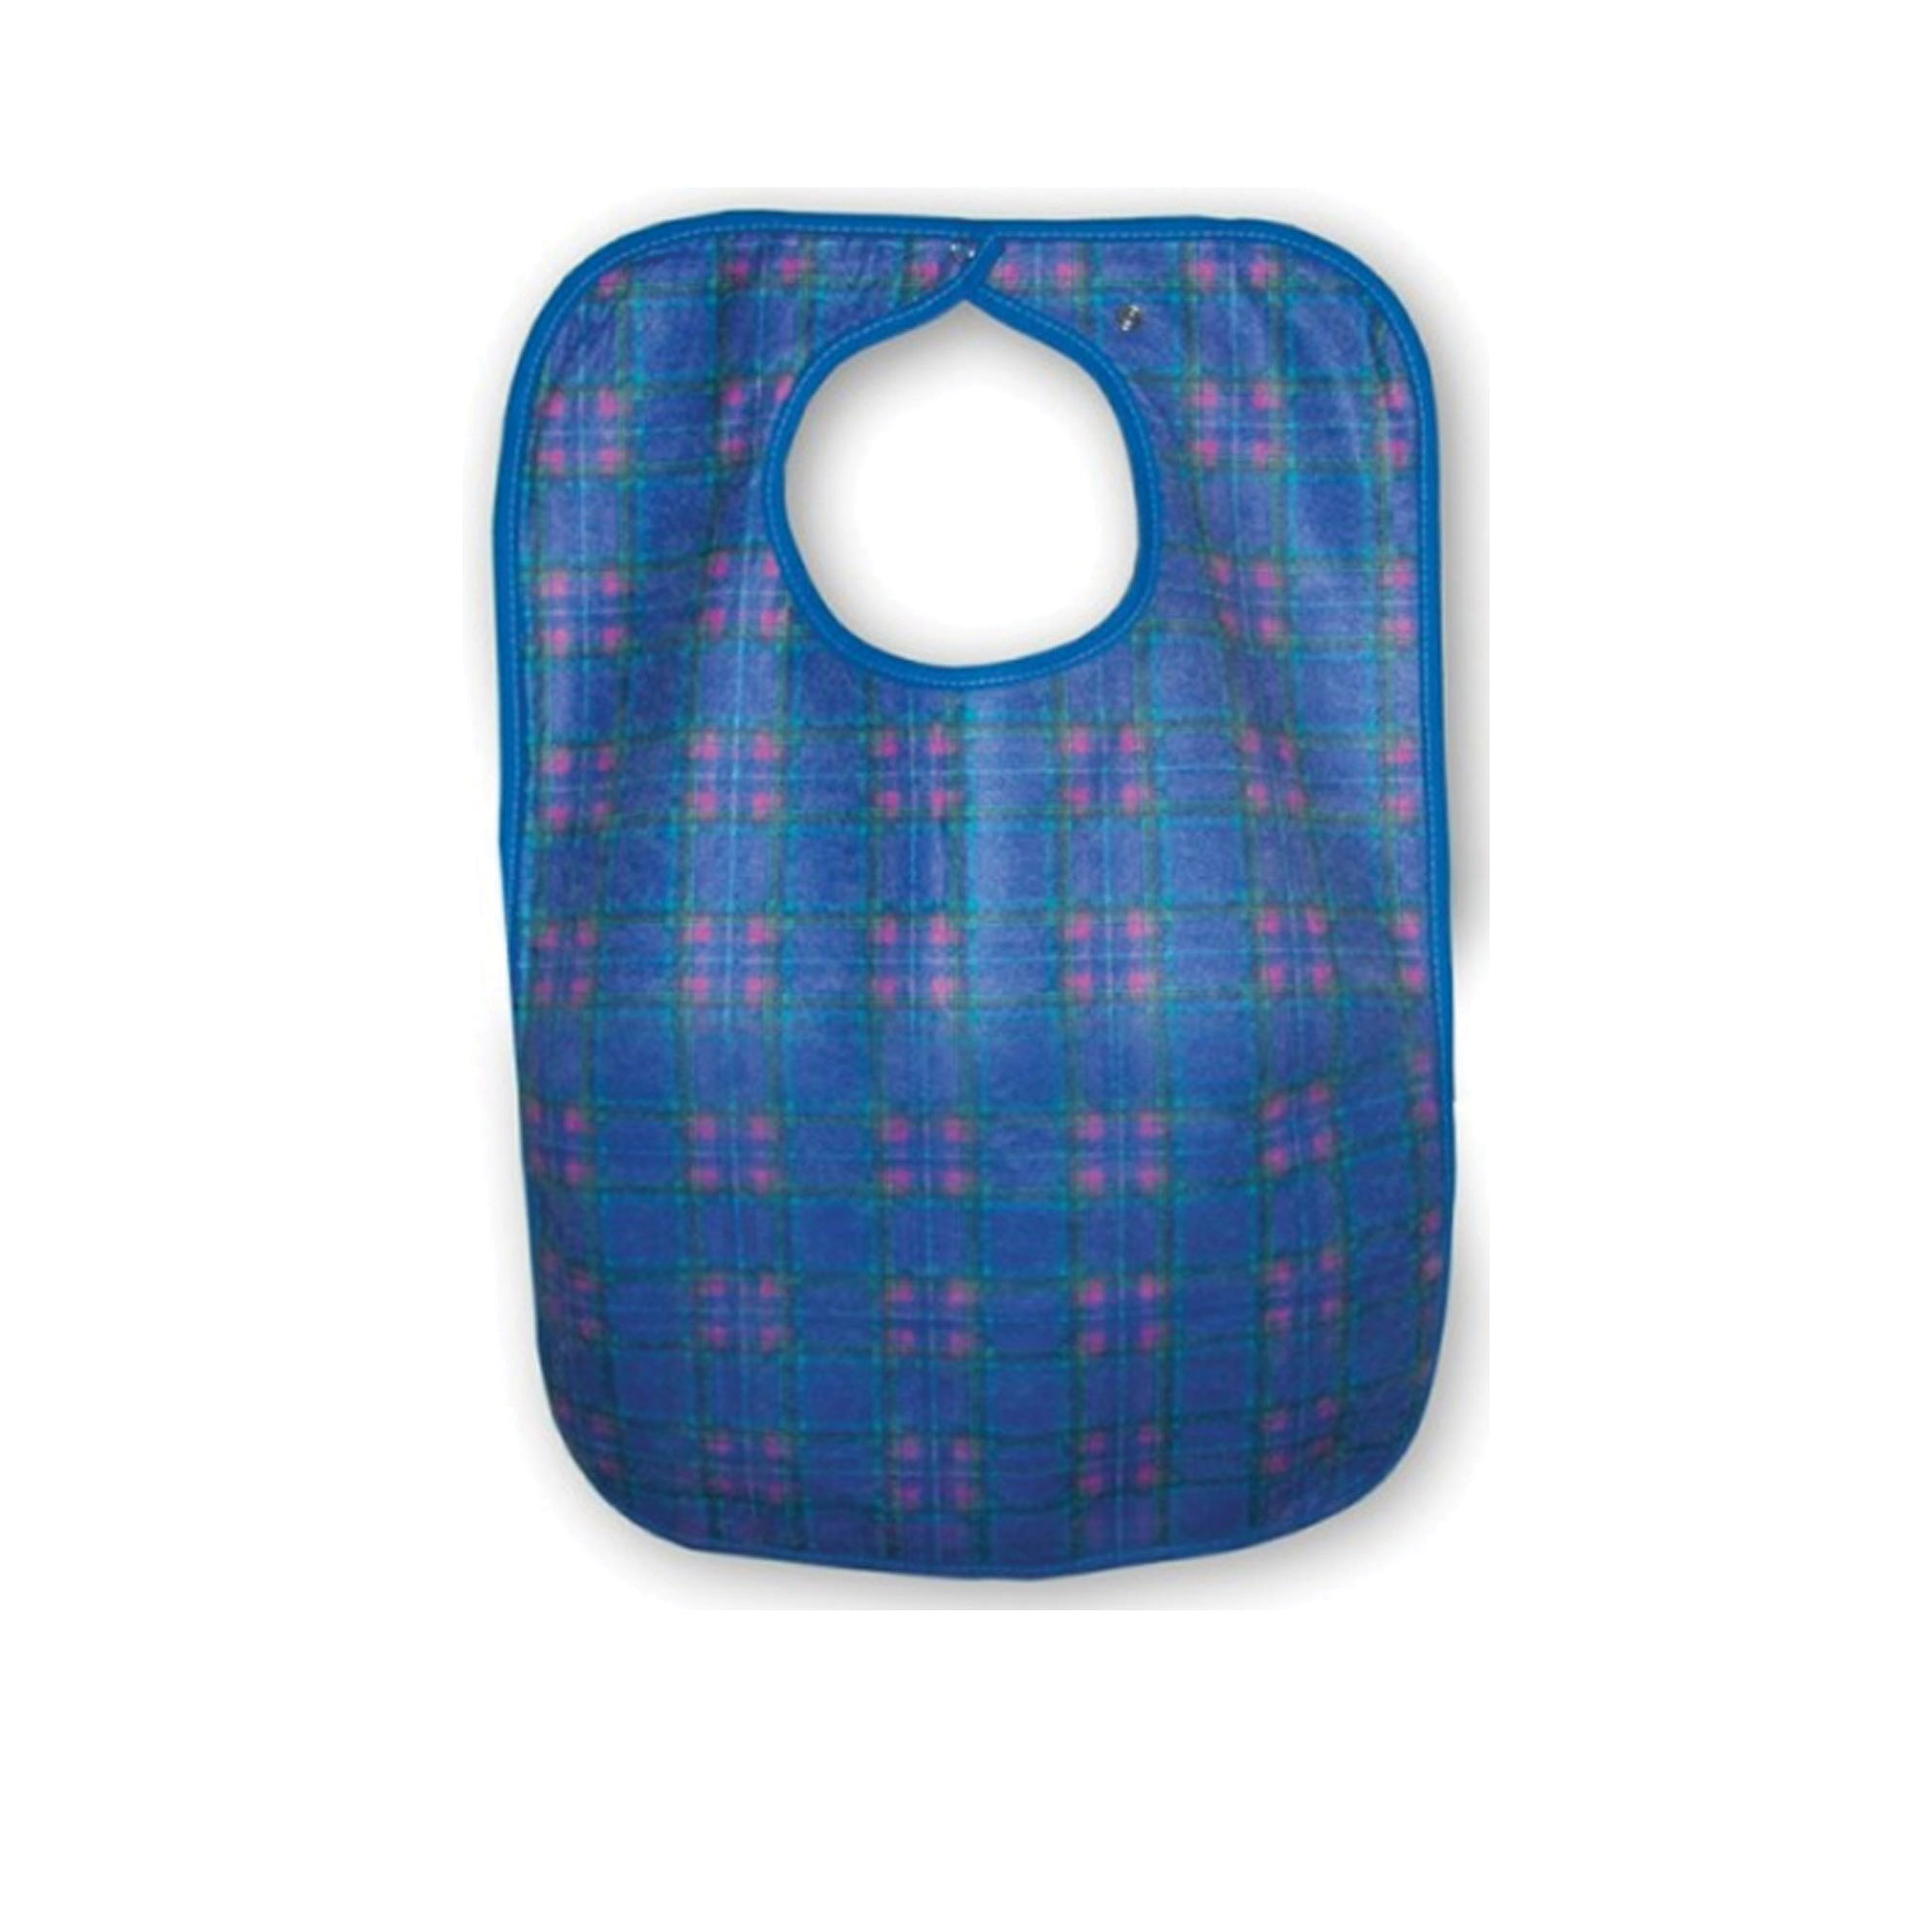 PrimaCare Blue & Red Check Clothing Protector / Adult Bib - 45 x 60cm